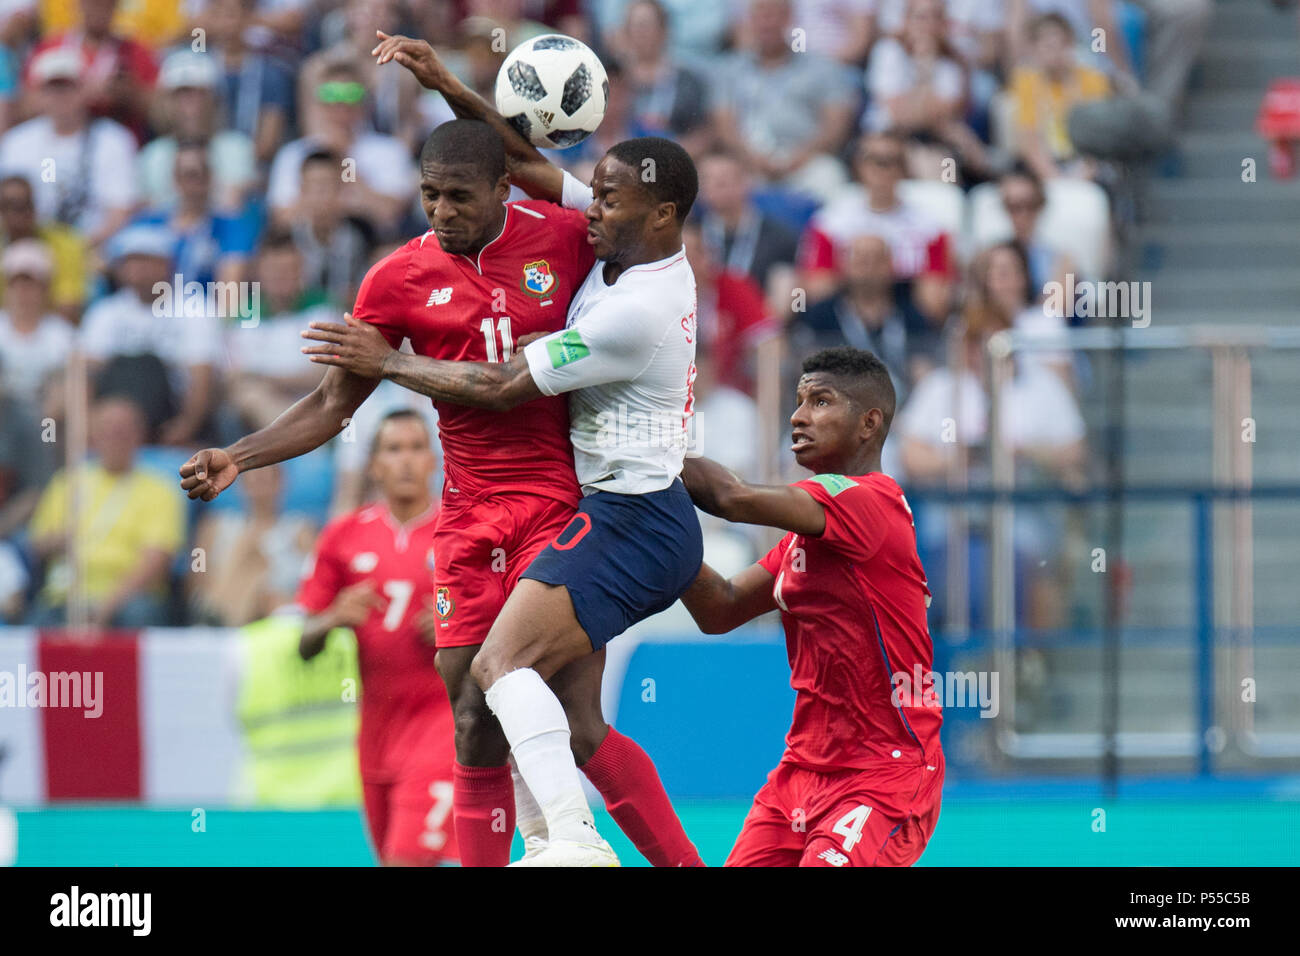 Fltr Armando COOPER (PAN), Raheem STERLING (ENG) and Fidel ESCOBAR (PAN) in the fight for the ball, action, airlift, England (ENG) - Panama (PAN) 6: 1, preliminary round, group G, match 30, on 24.06.2018 in Nizhny Novgorod; Football World Cup 2018 in Russia from 14.06. - 15.07.2018. | usage worldwide Stock Photo